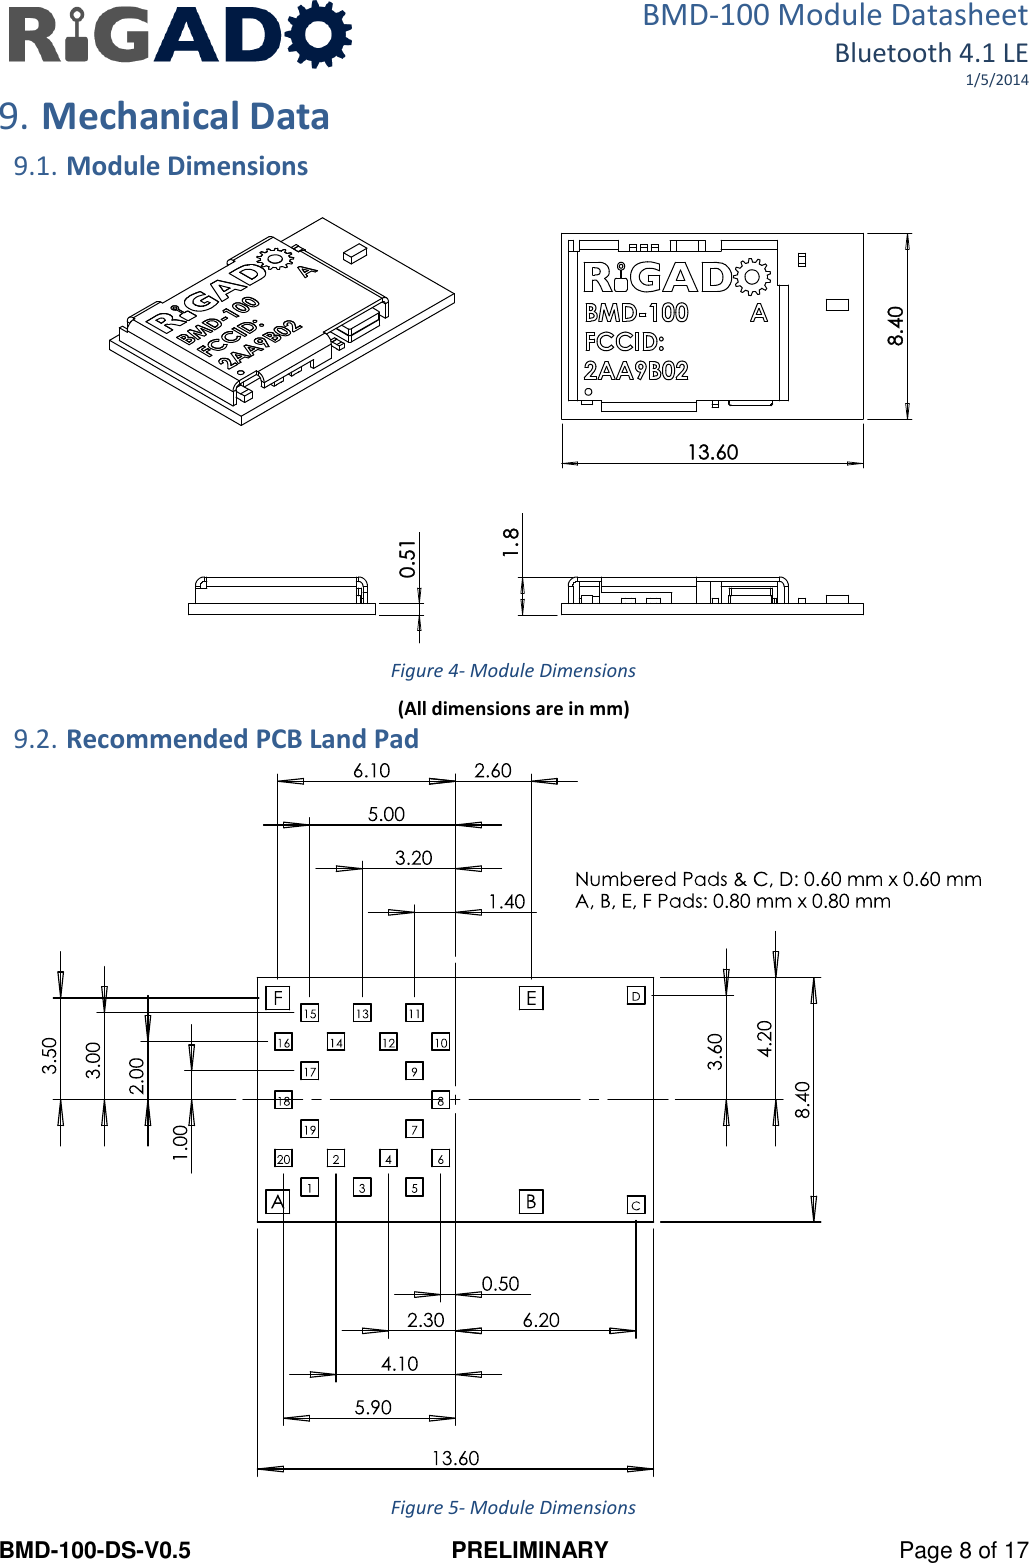 BMD-100 Module Datasheet Bluetooth 4.1 LE 1/5/2014 BMD-100-DS-V0.5  PRELIMINARY  Page 8 of 17 9. Mechanical Data  9.1. Module Dimensions   Figure 4- Module Dimensions (All dimensions are in mm) 9.2. Recommended PCB Land Pad  Figure 5- Module Dimensions 